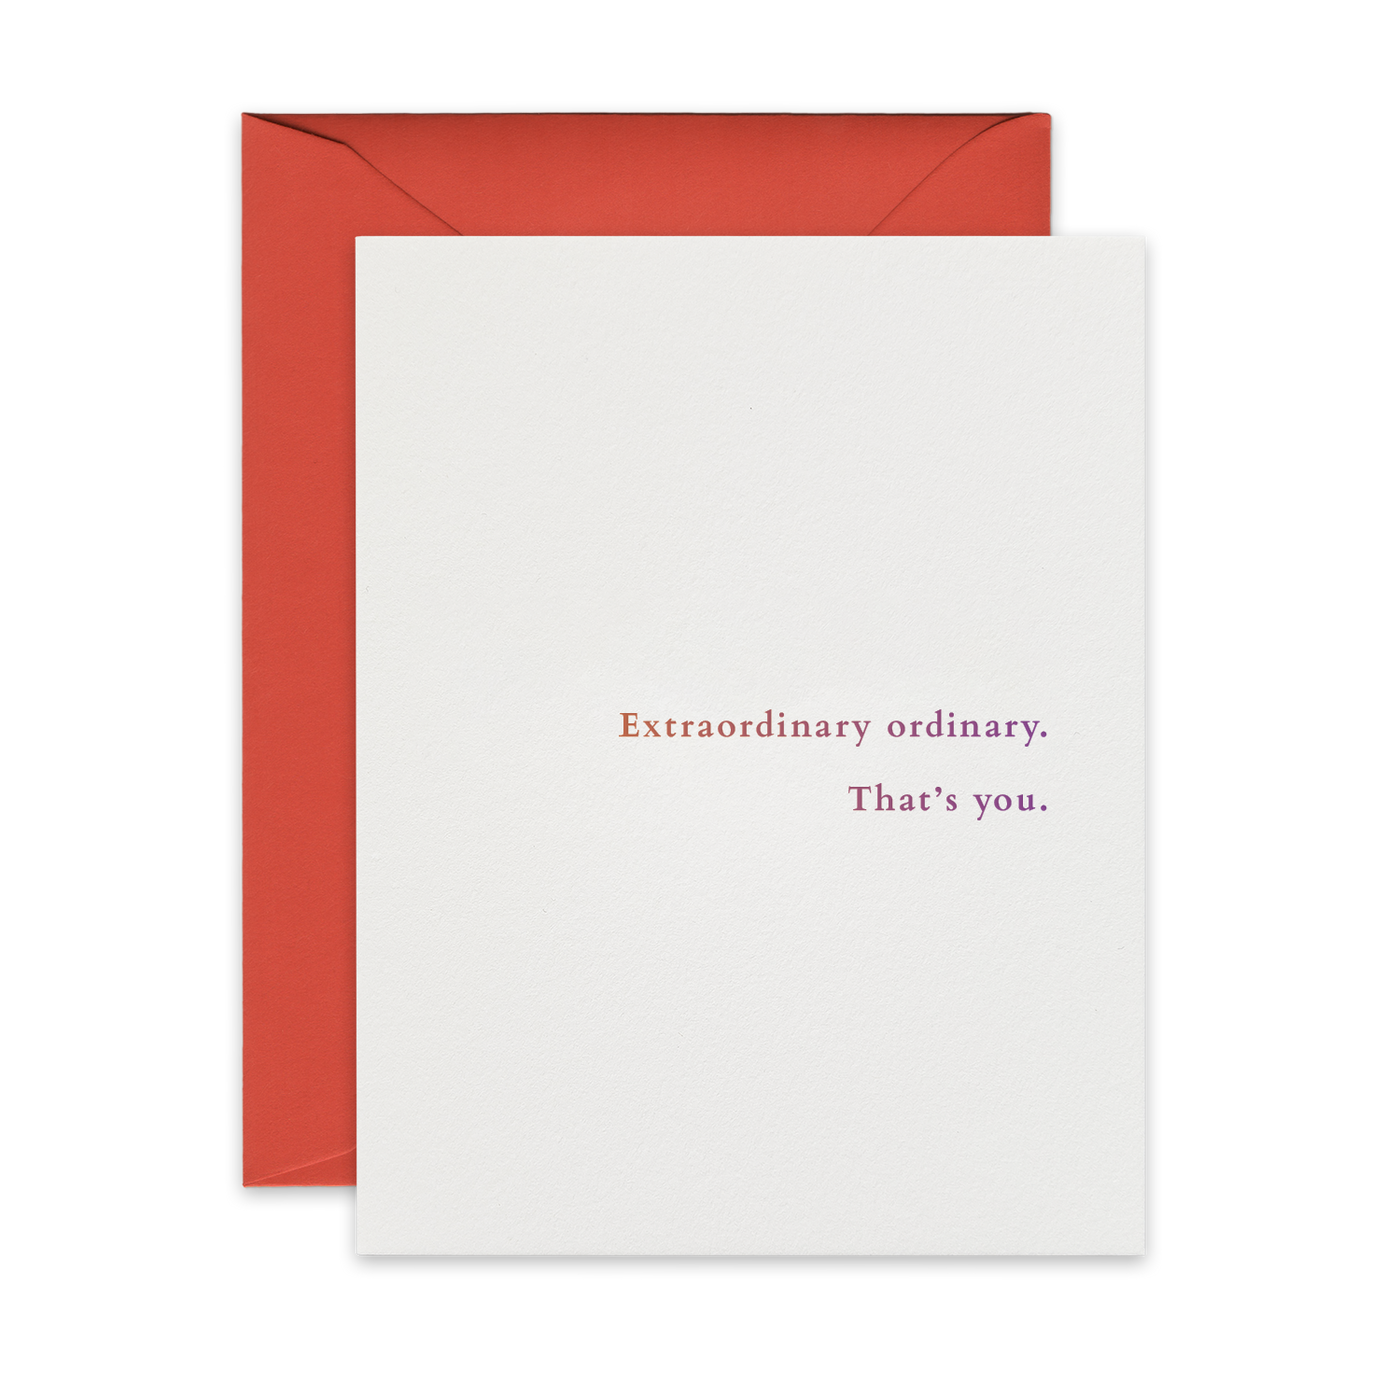 Ómbre printed front of greeting card by beknown. Extraordinary ordinary. That's you.